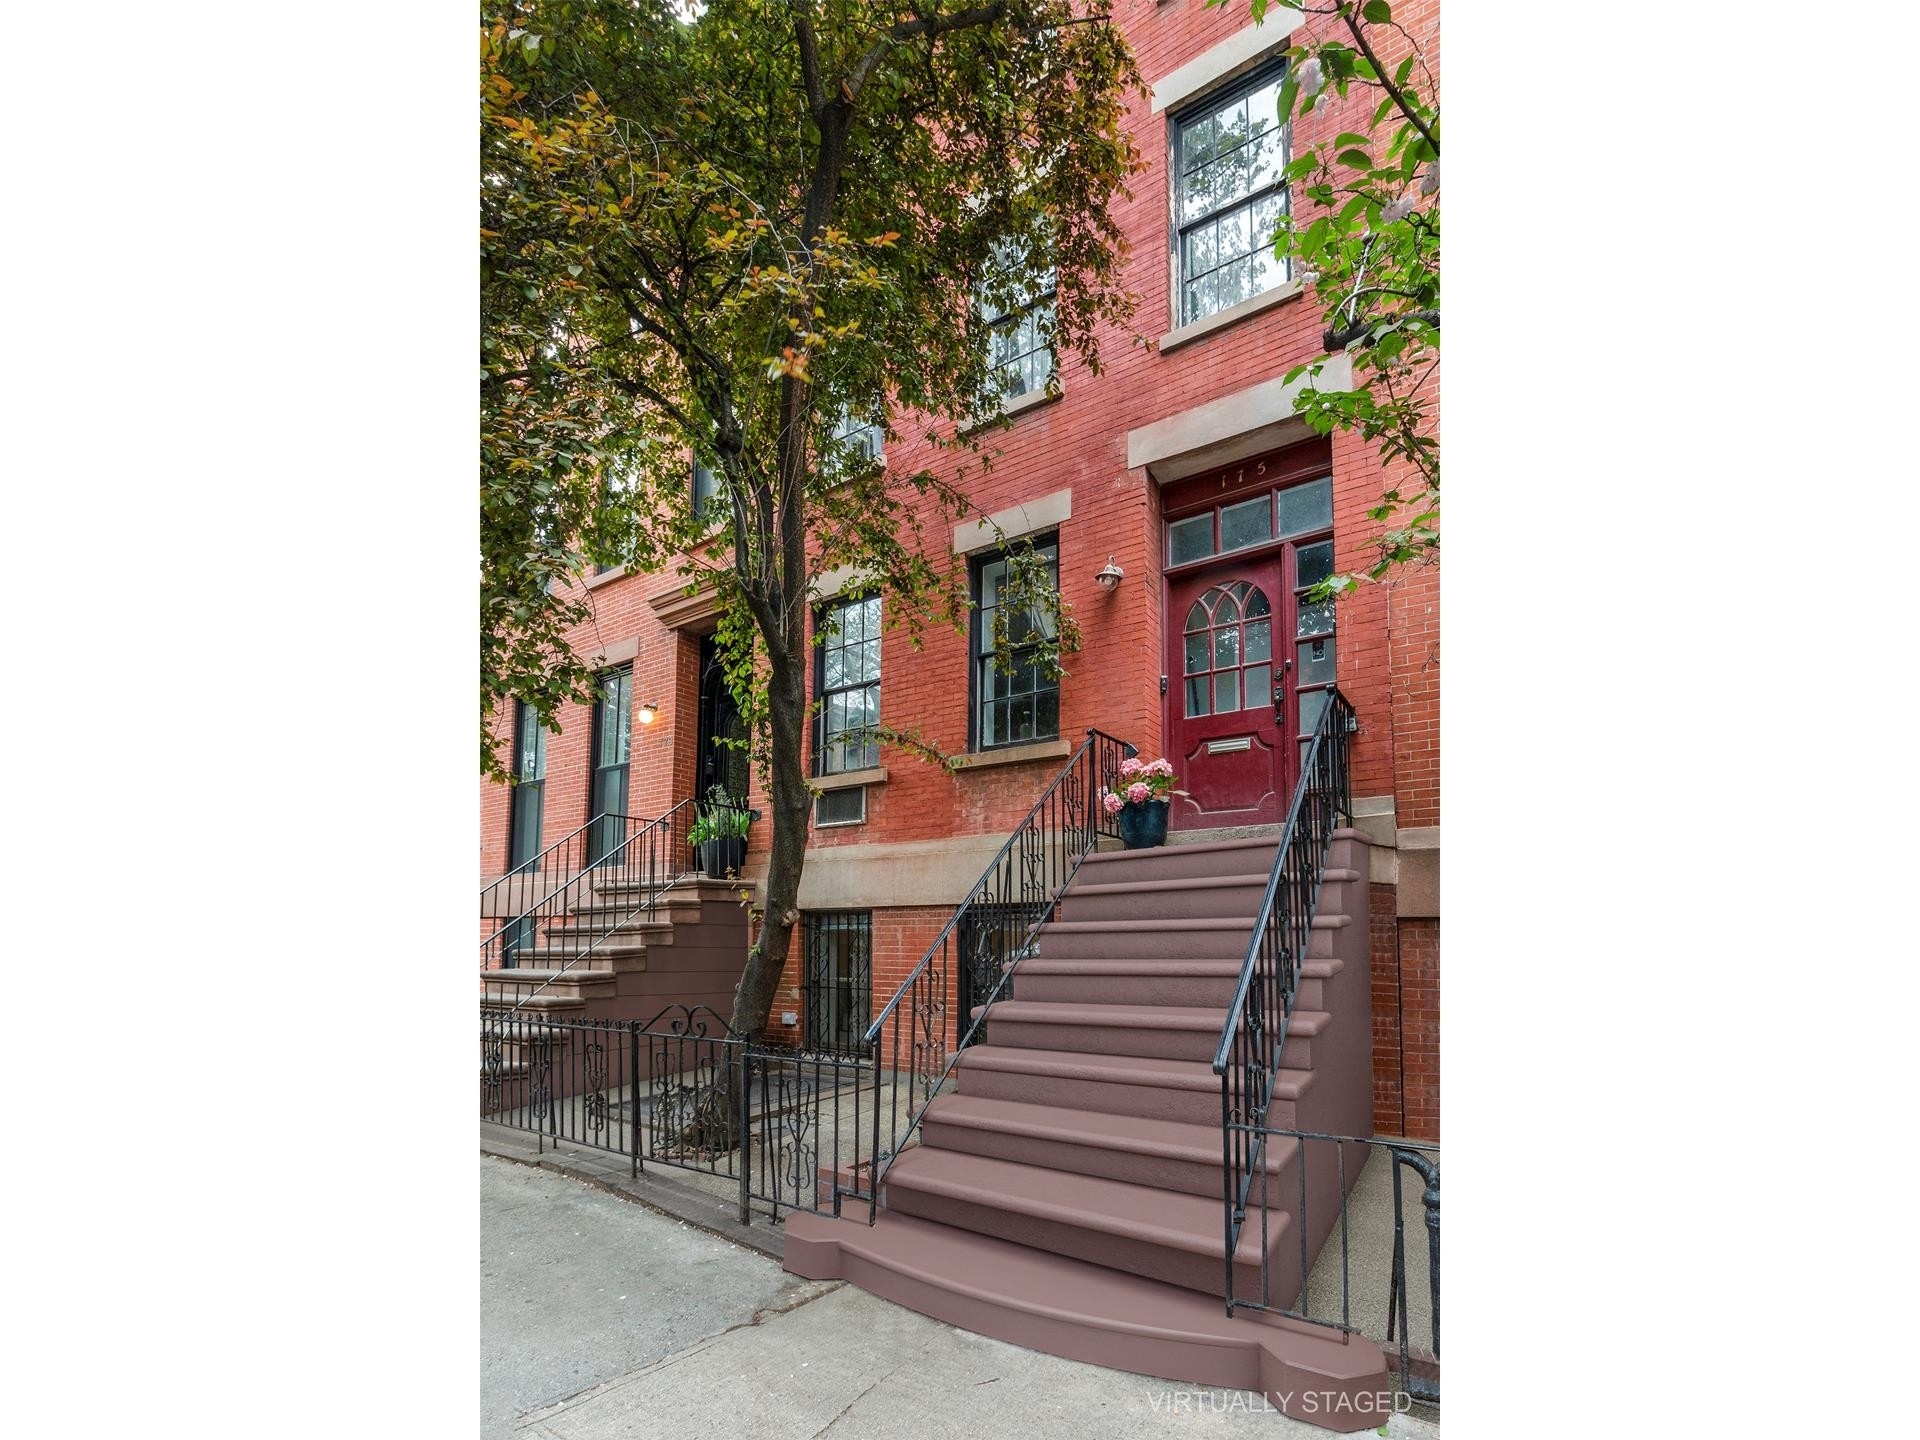 2. Multi Family Townhouse for Sale at 175 BERGEN ST, TOWNHOUSE Boerum Hill, Brooklyn, NY 11217